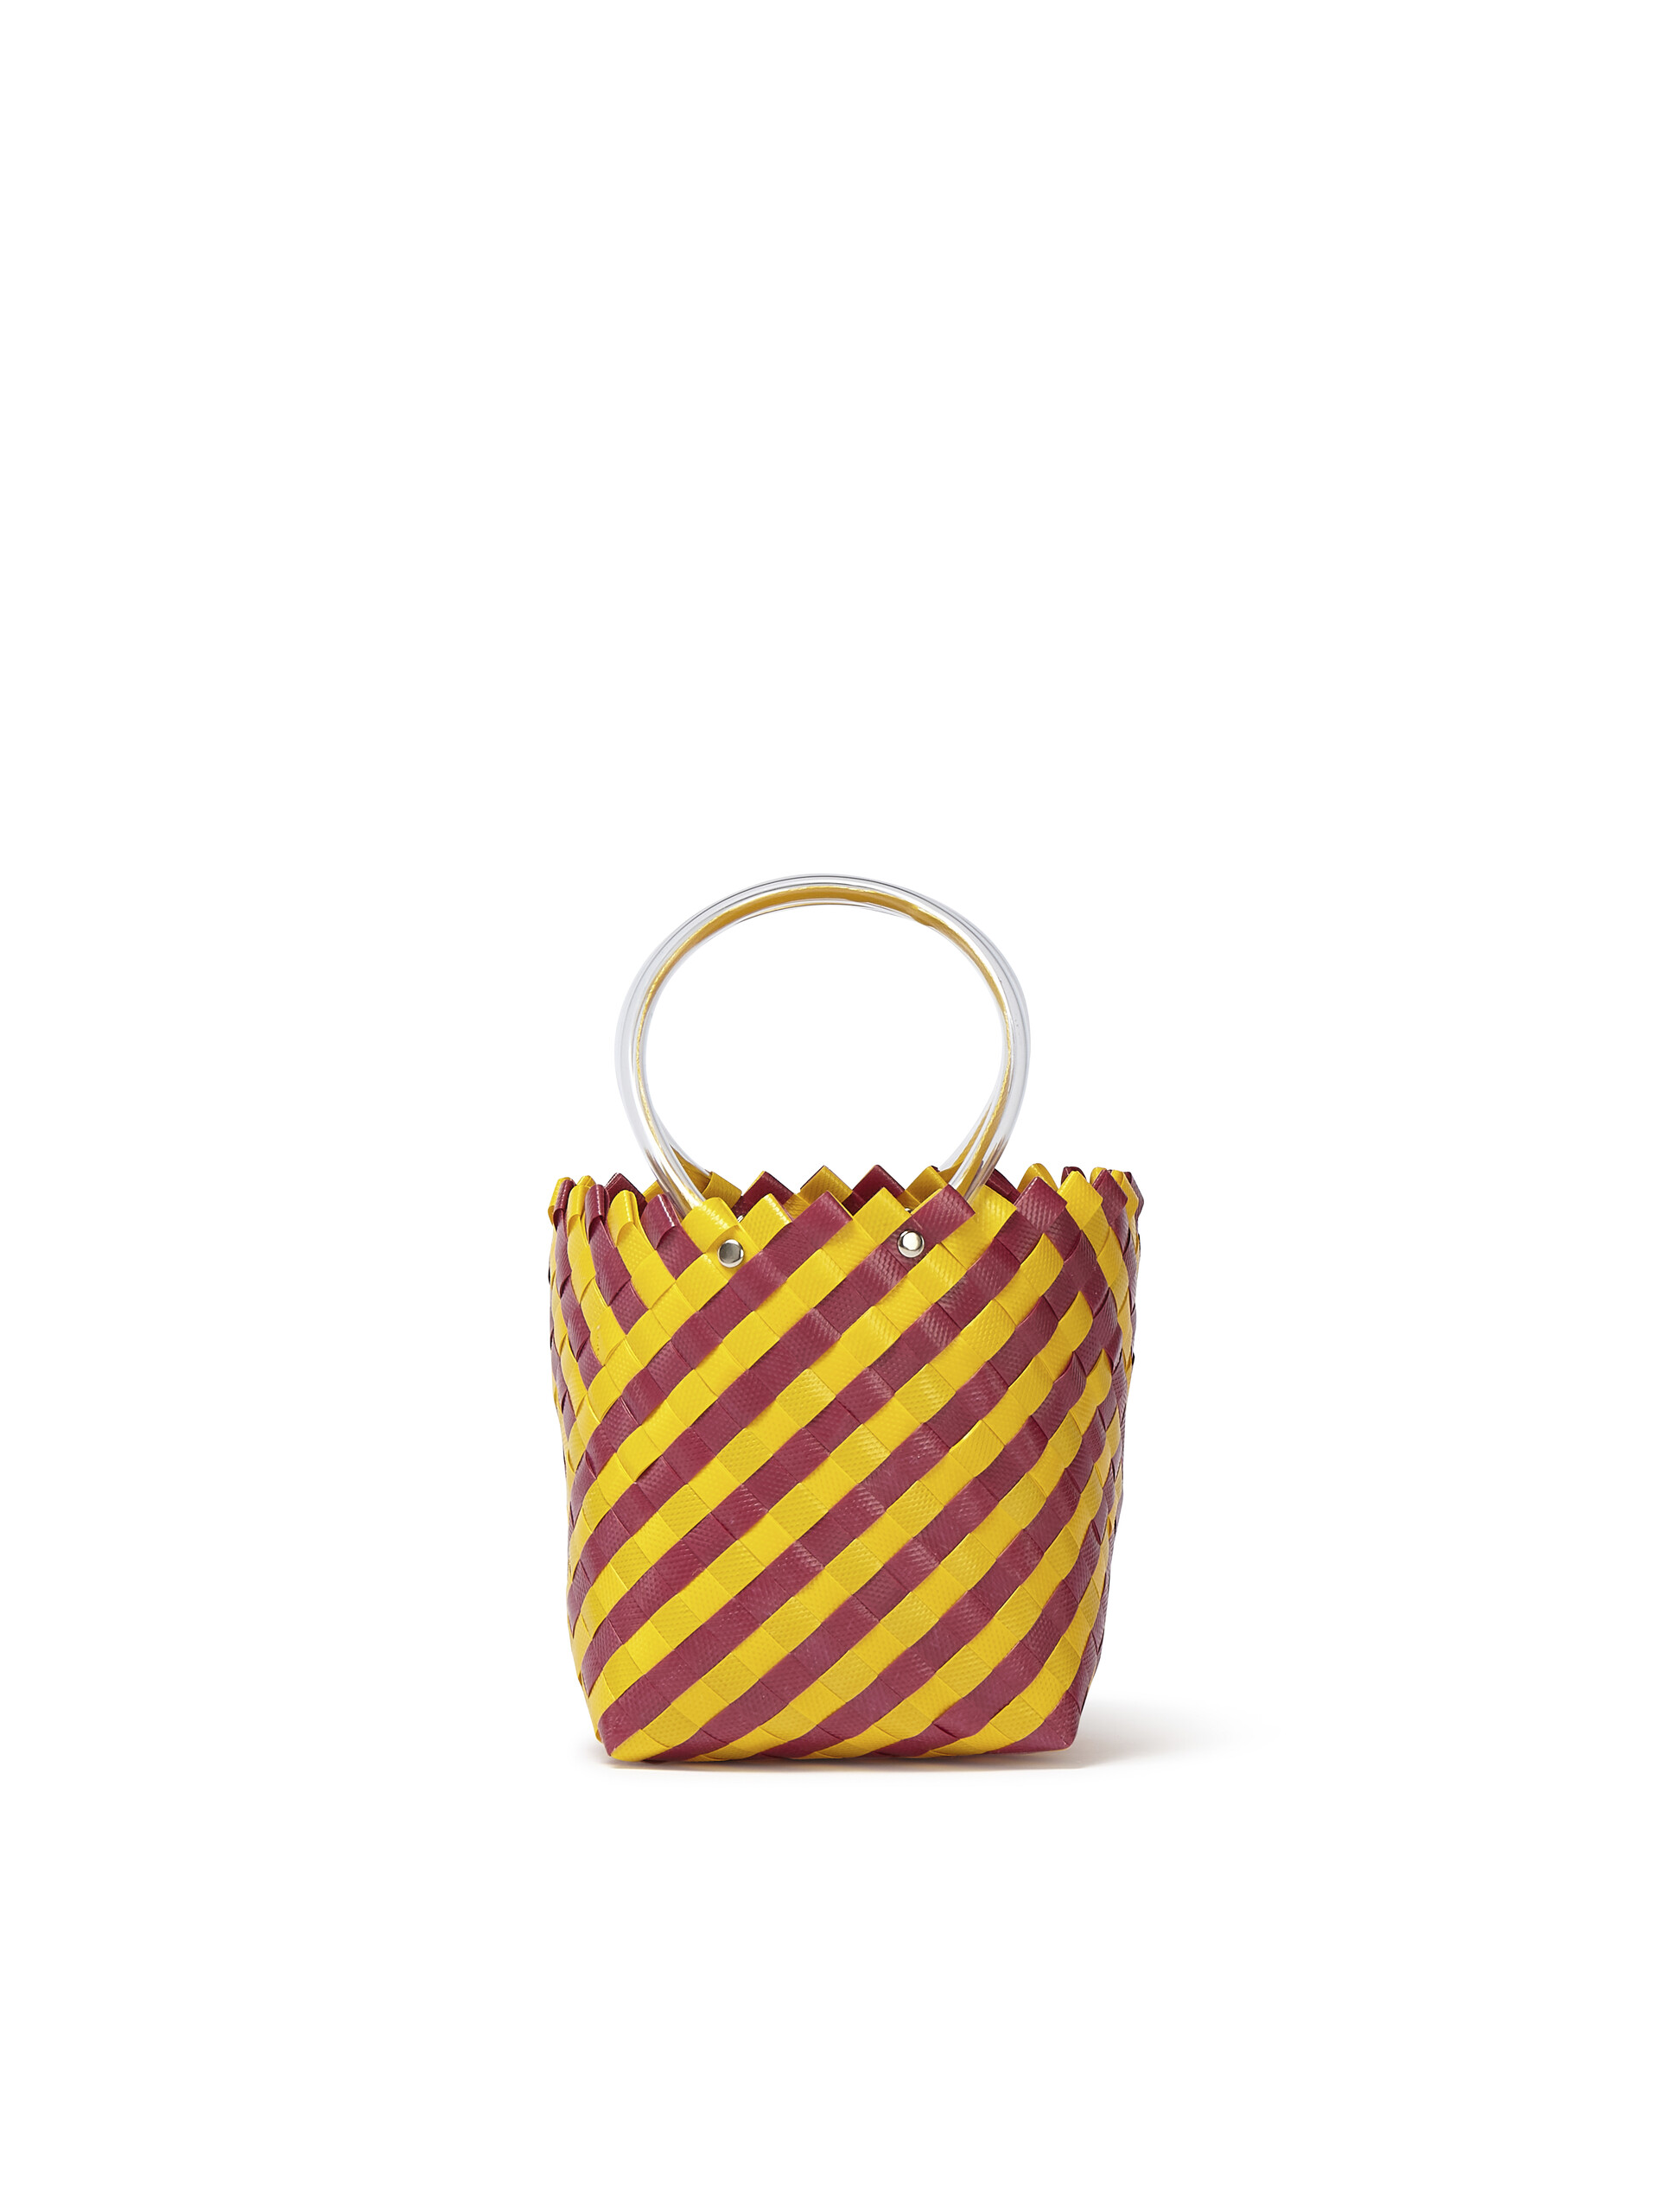 MARNI MARKET TAHA bag in yellow and burgundy woven material - Shopping Bags - Image 3